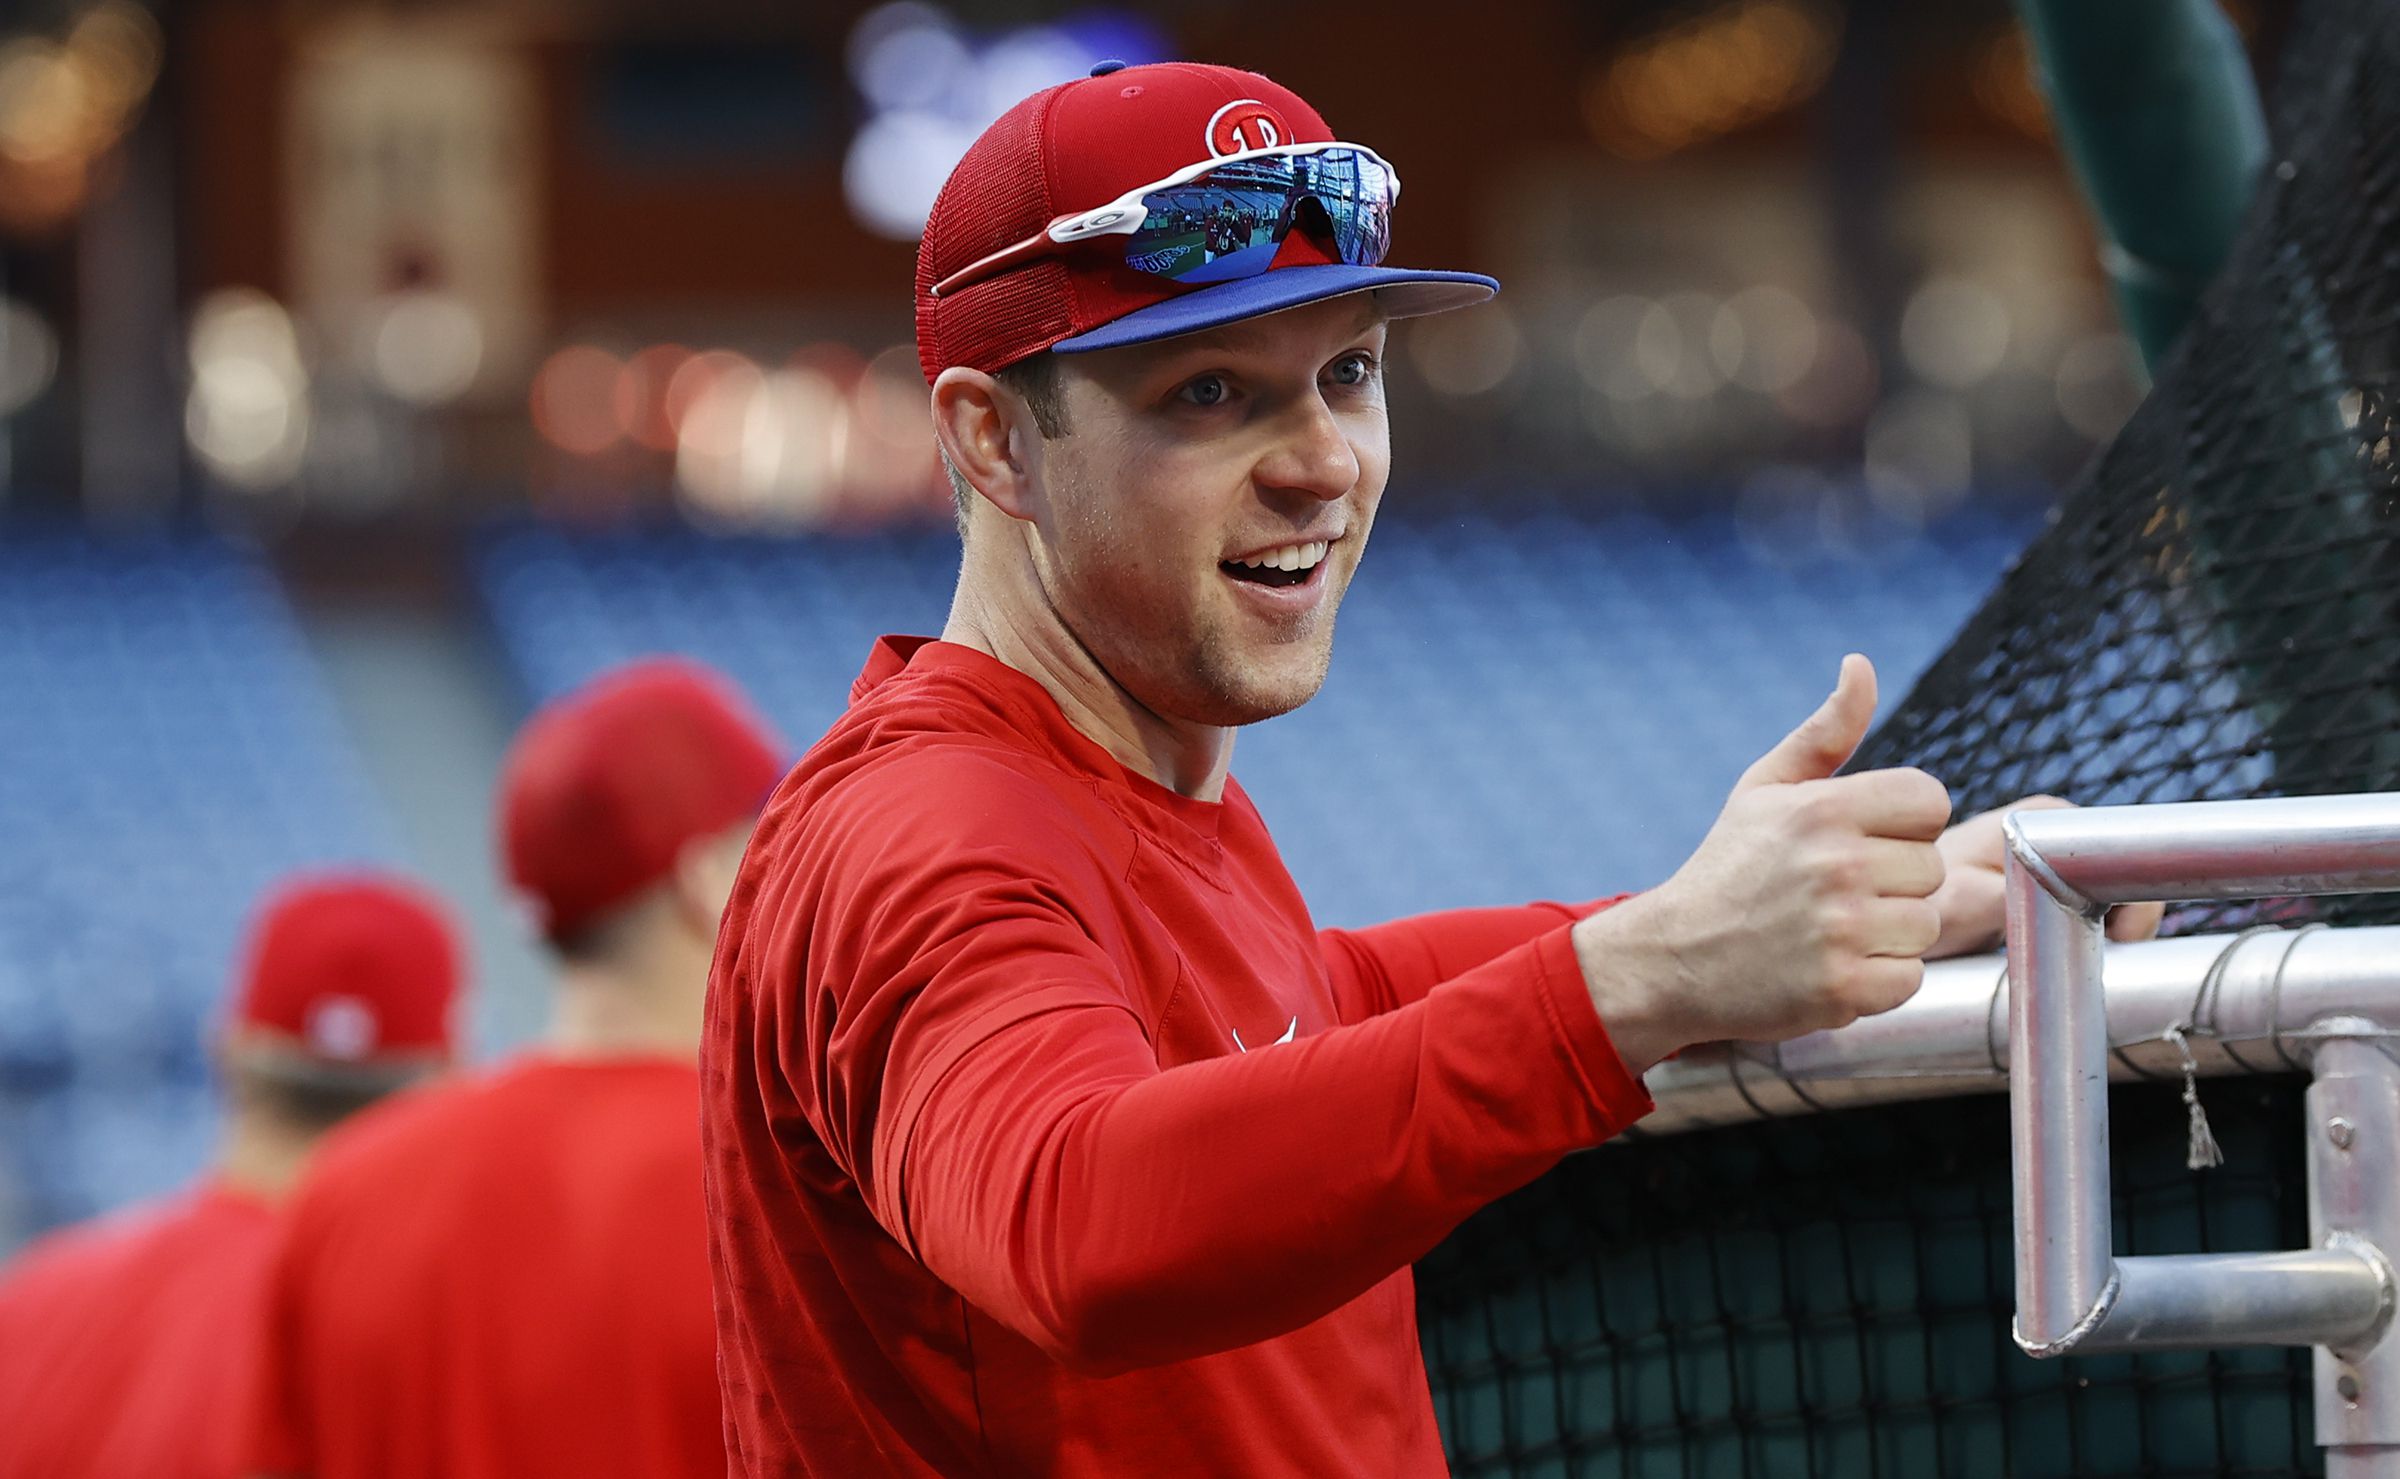 Phillies' Rhys Hoskins deserved a magical playoff moment. And he